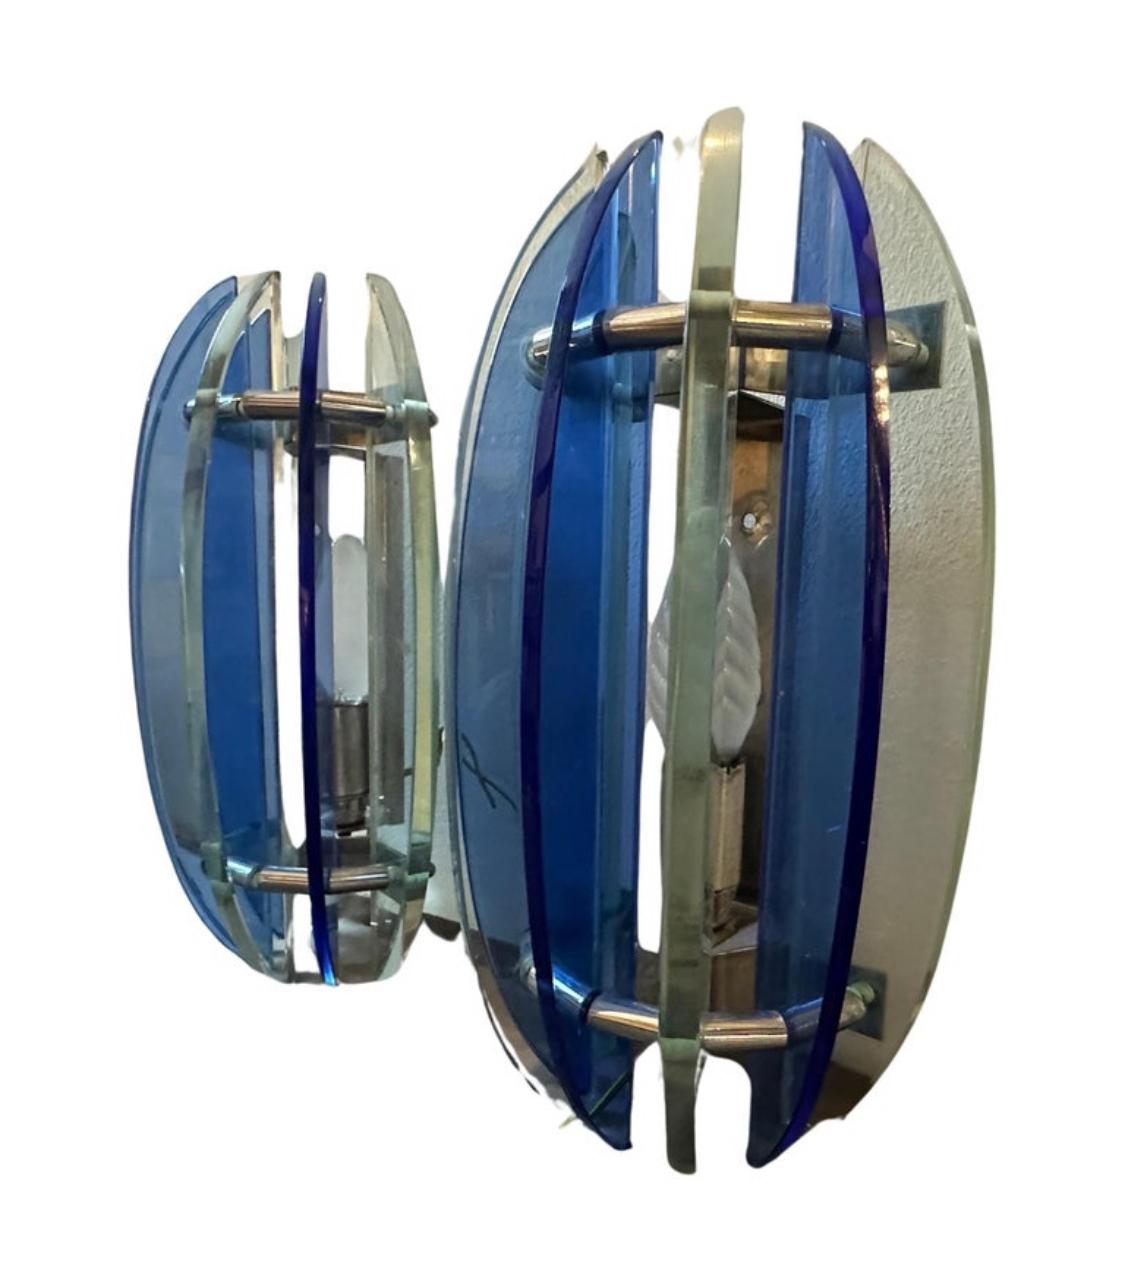 A pair of iconic wall sconces designed and manufactured in Italy by Veca in the Space Age Era, they are in perfect condition and in working order.This set of Wall Sconces by Veca it's a striking representation of mid-century modern design. They are